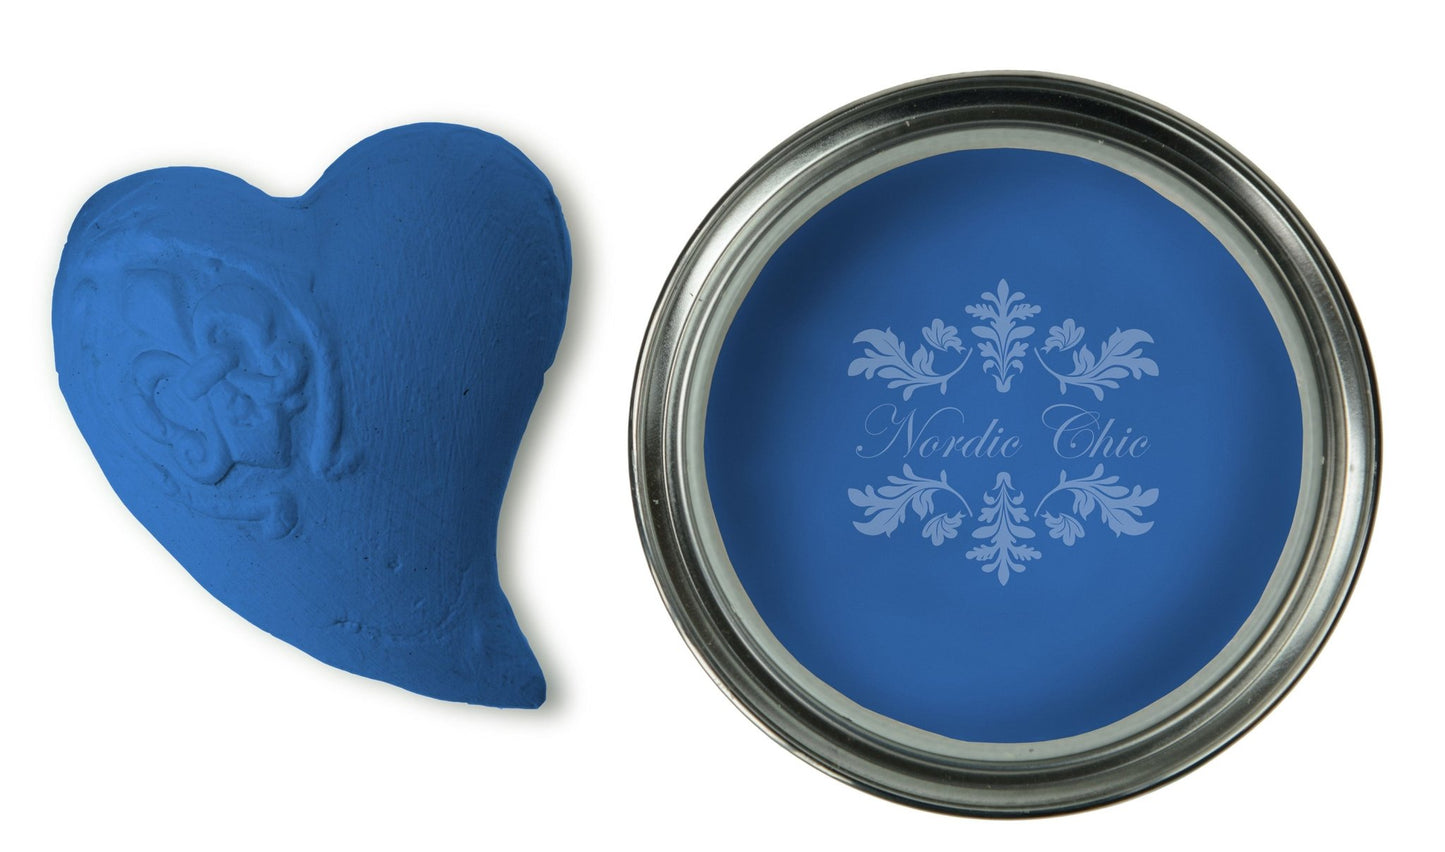 Nordic Chic Furniture Paint - Blue Eyes - Nordic Chic®